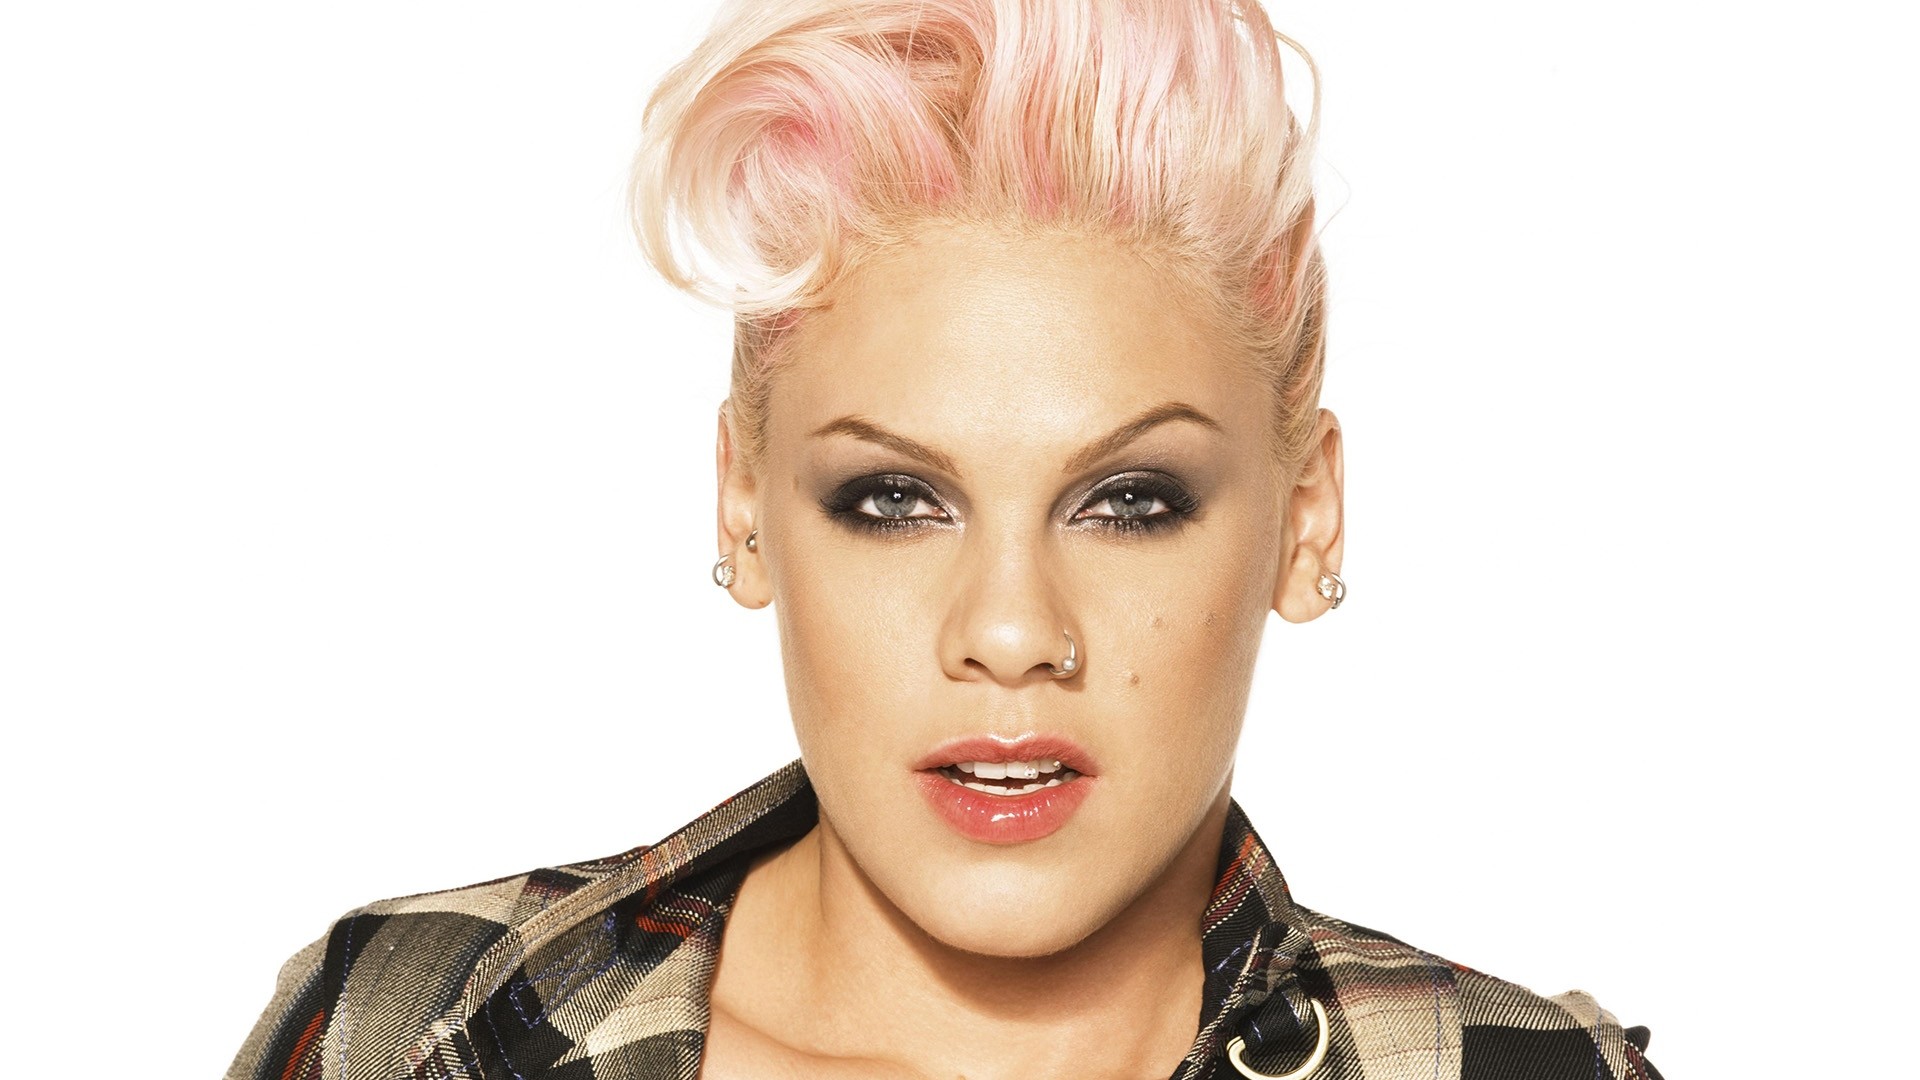 P Nk Backgrounds - Wallpaper Cave